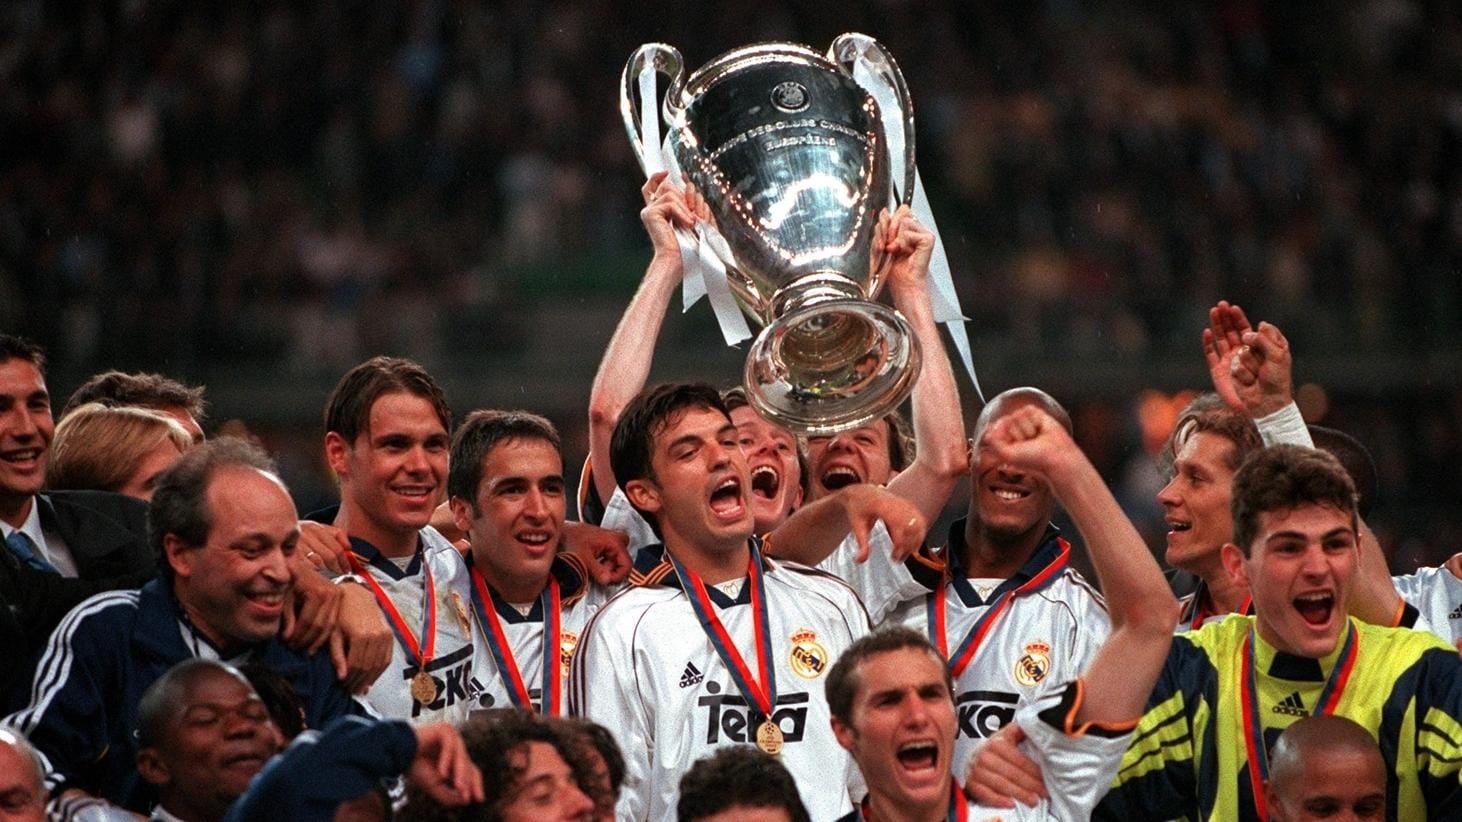 real madrid 2000 champions league